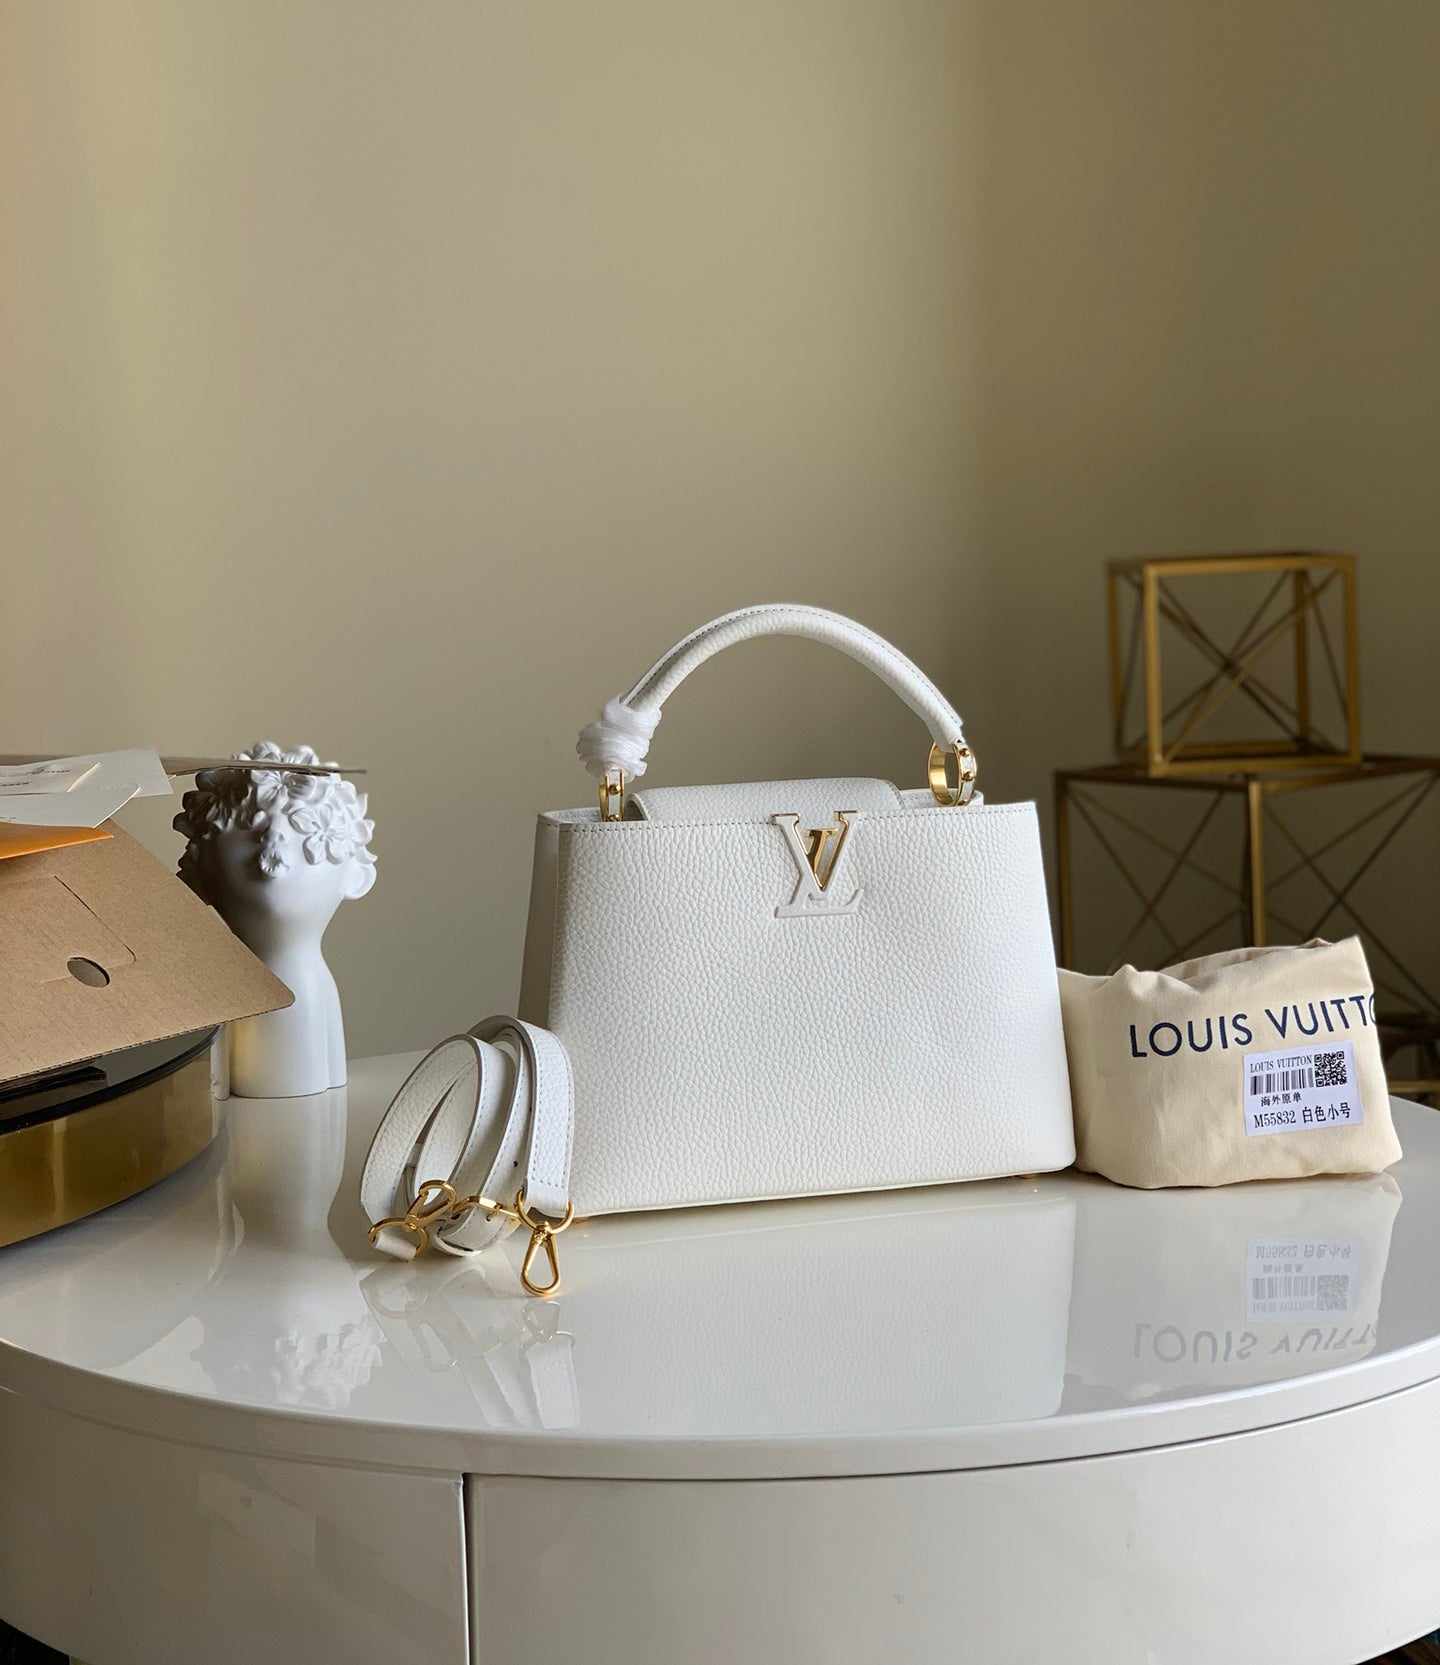 Louis Vuitton Capucines Bb Handbag in Beige Grained Leather and